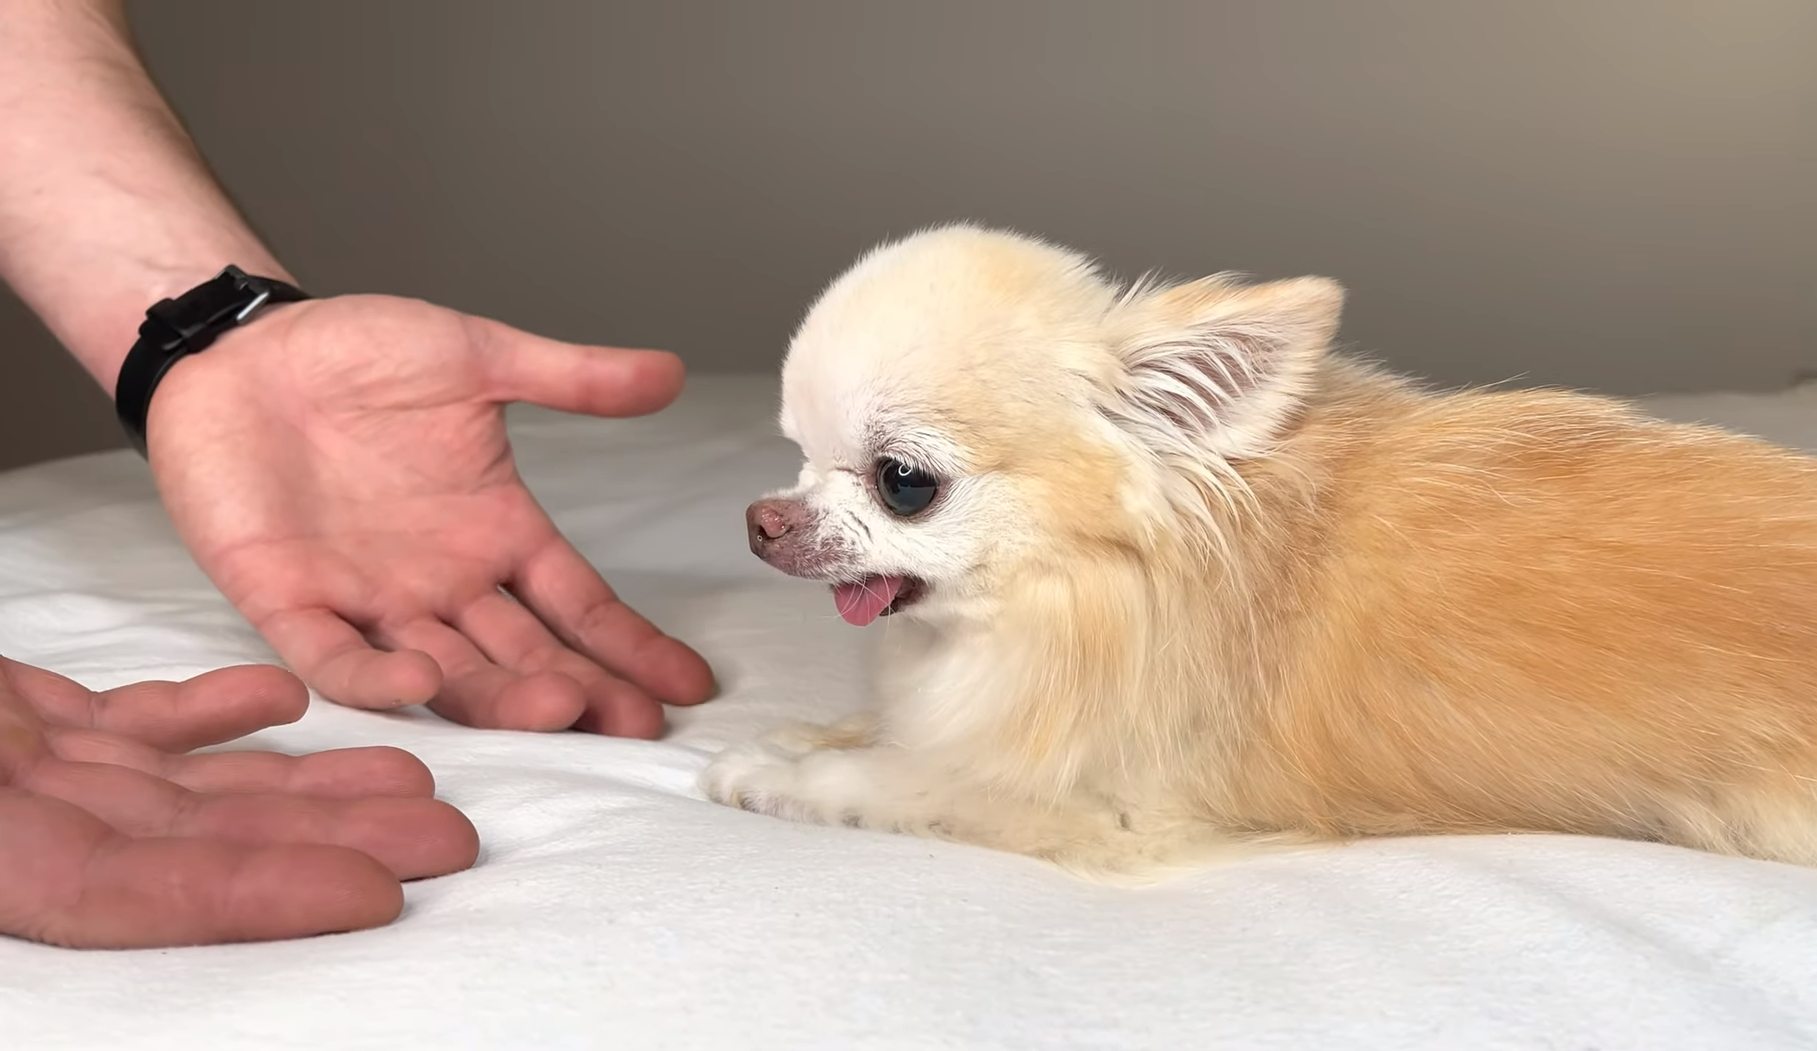 Steps to Trimming Your Chihuahua's Nails